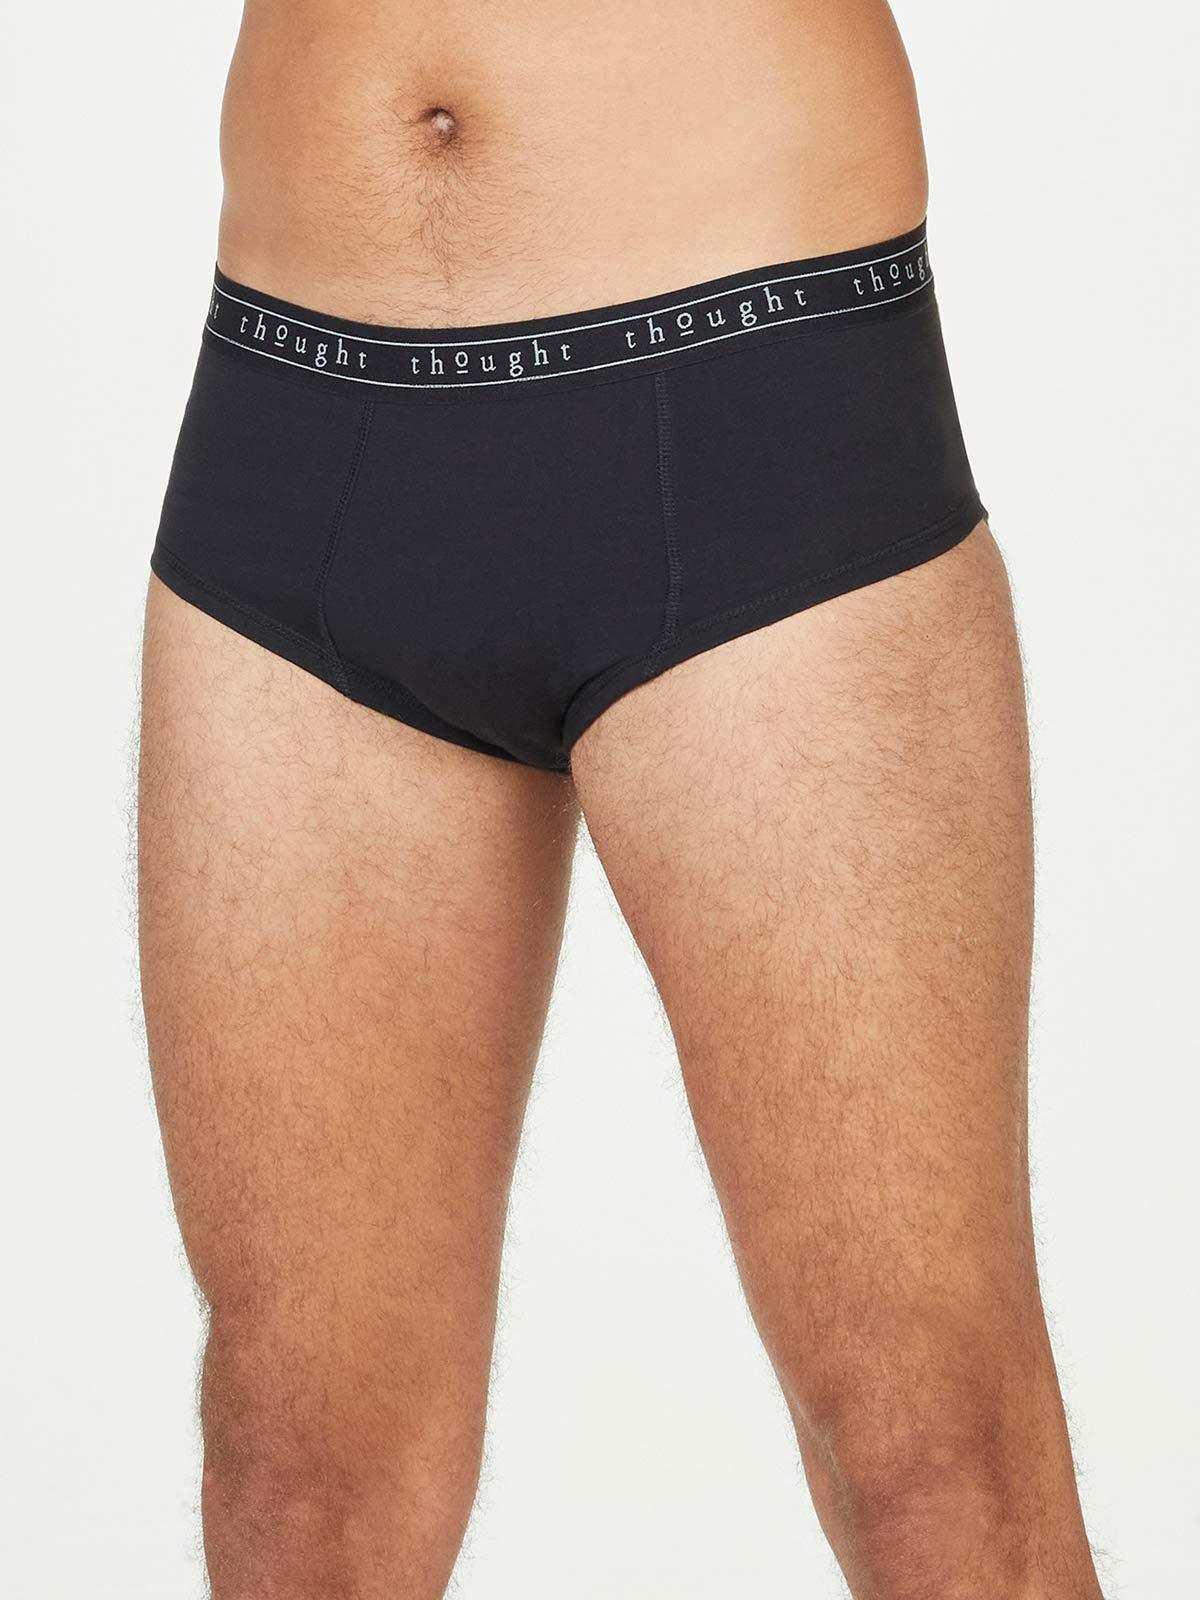 Samuel GOTS Organic Cotton Y-Front Briefs - Thought Clothing UK